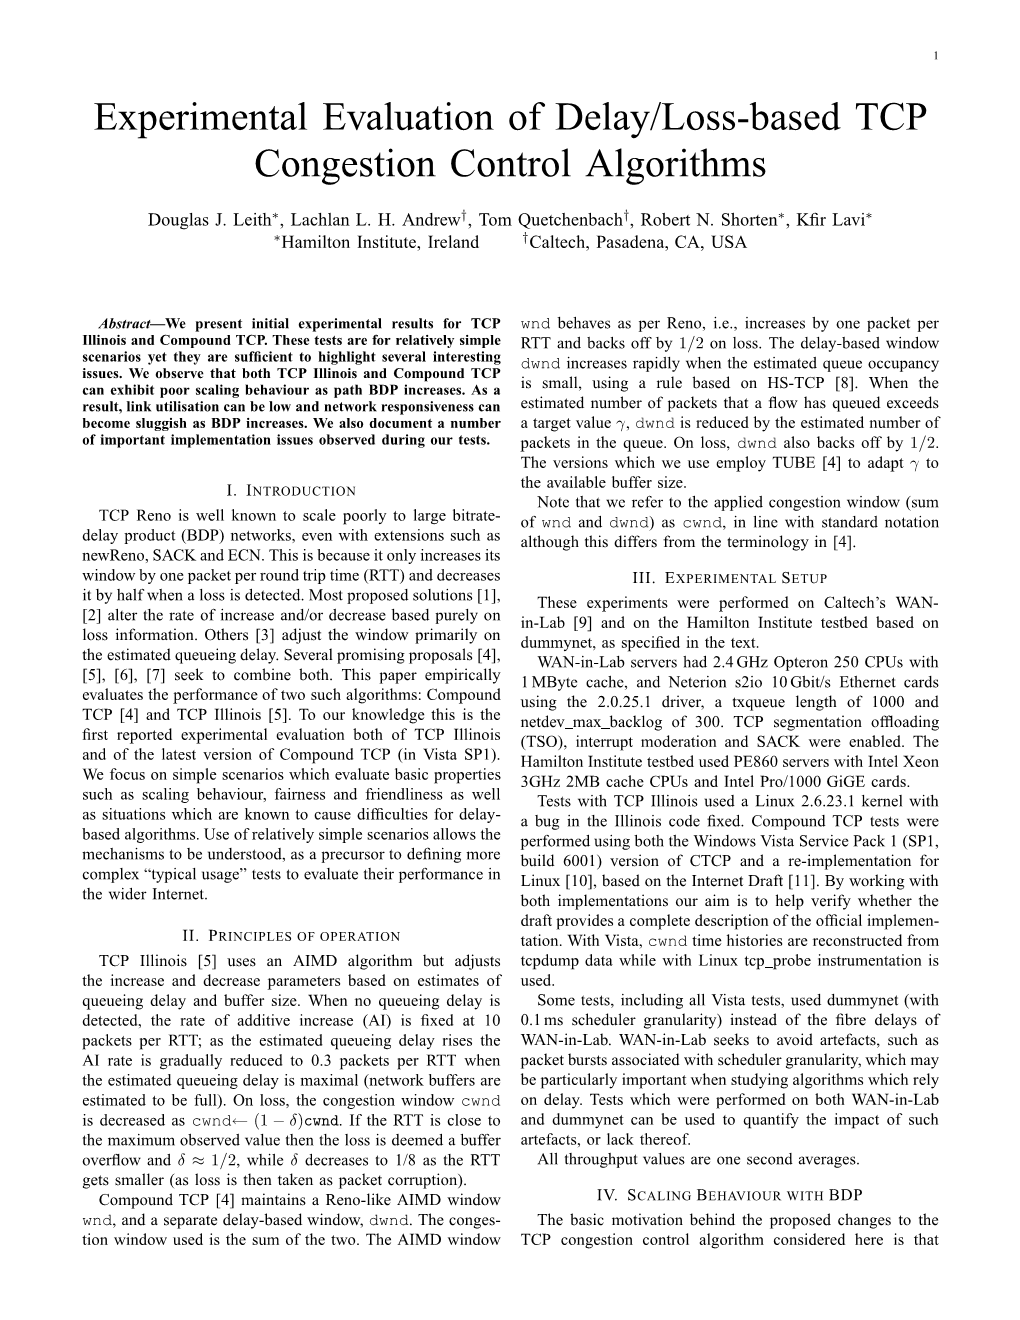 Experimental Evaluation of Delay/Loss-Based TCP Congestion Control Algorithms